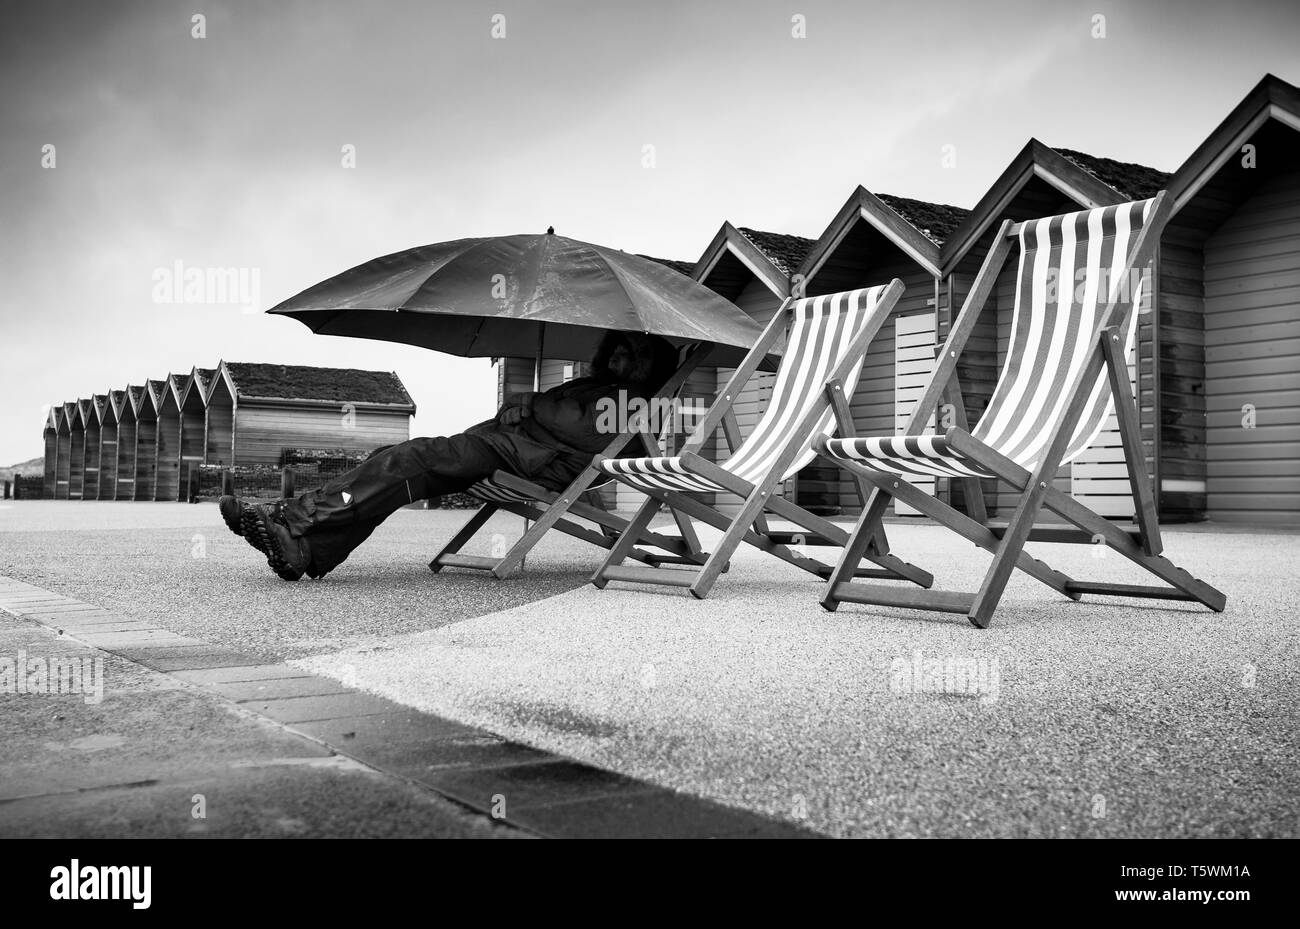 No sunrise this morning at Blyth beach huts, the coastline was surrounded by fog & rain, this didn't stop locals out with their deck chairs & umbrella Stock Photo